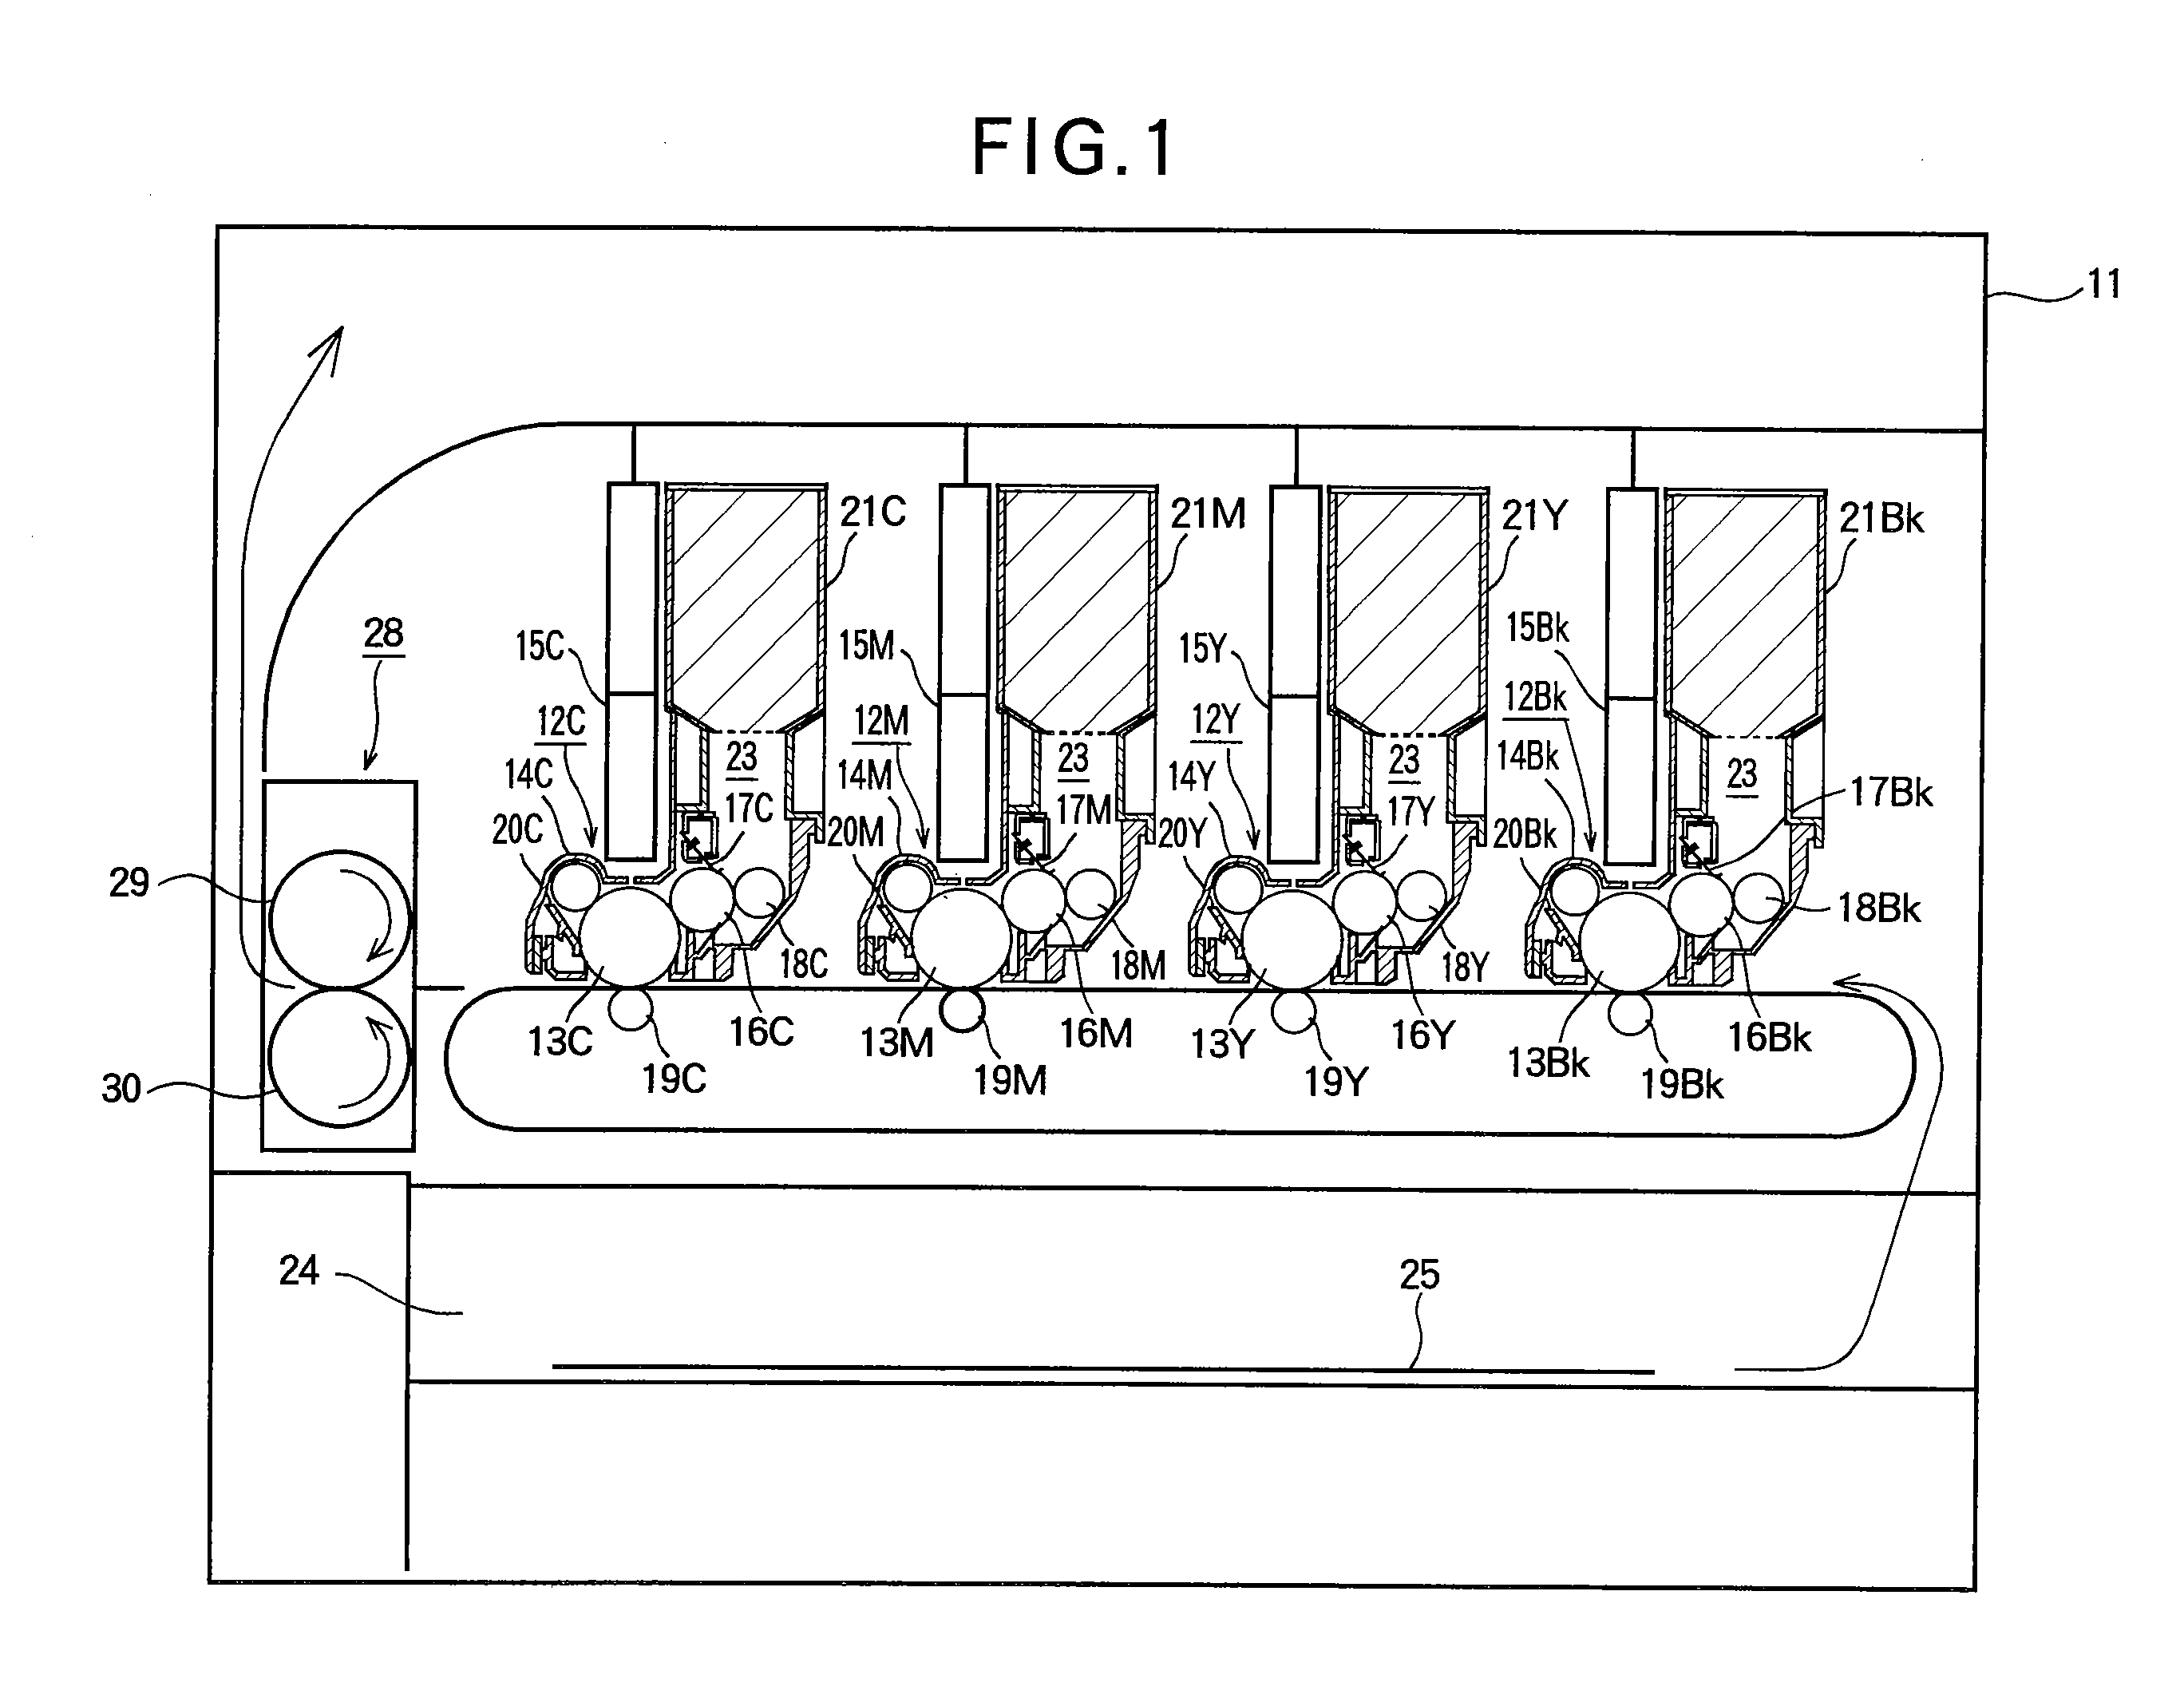 Developer cartridge, image forming unit and image forming apparatus